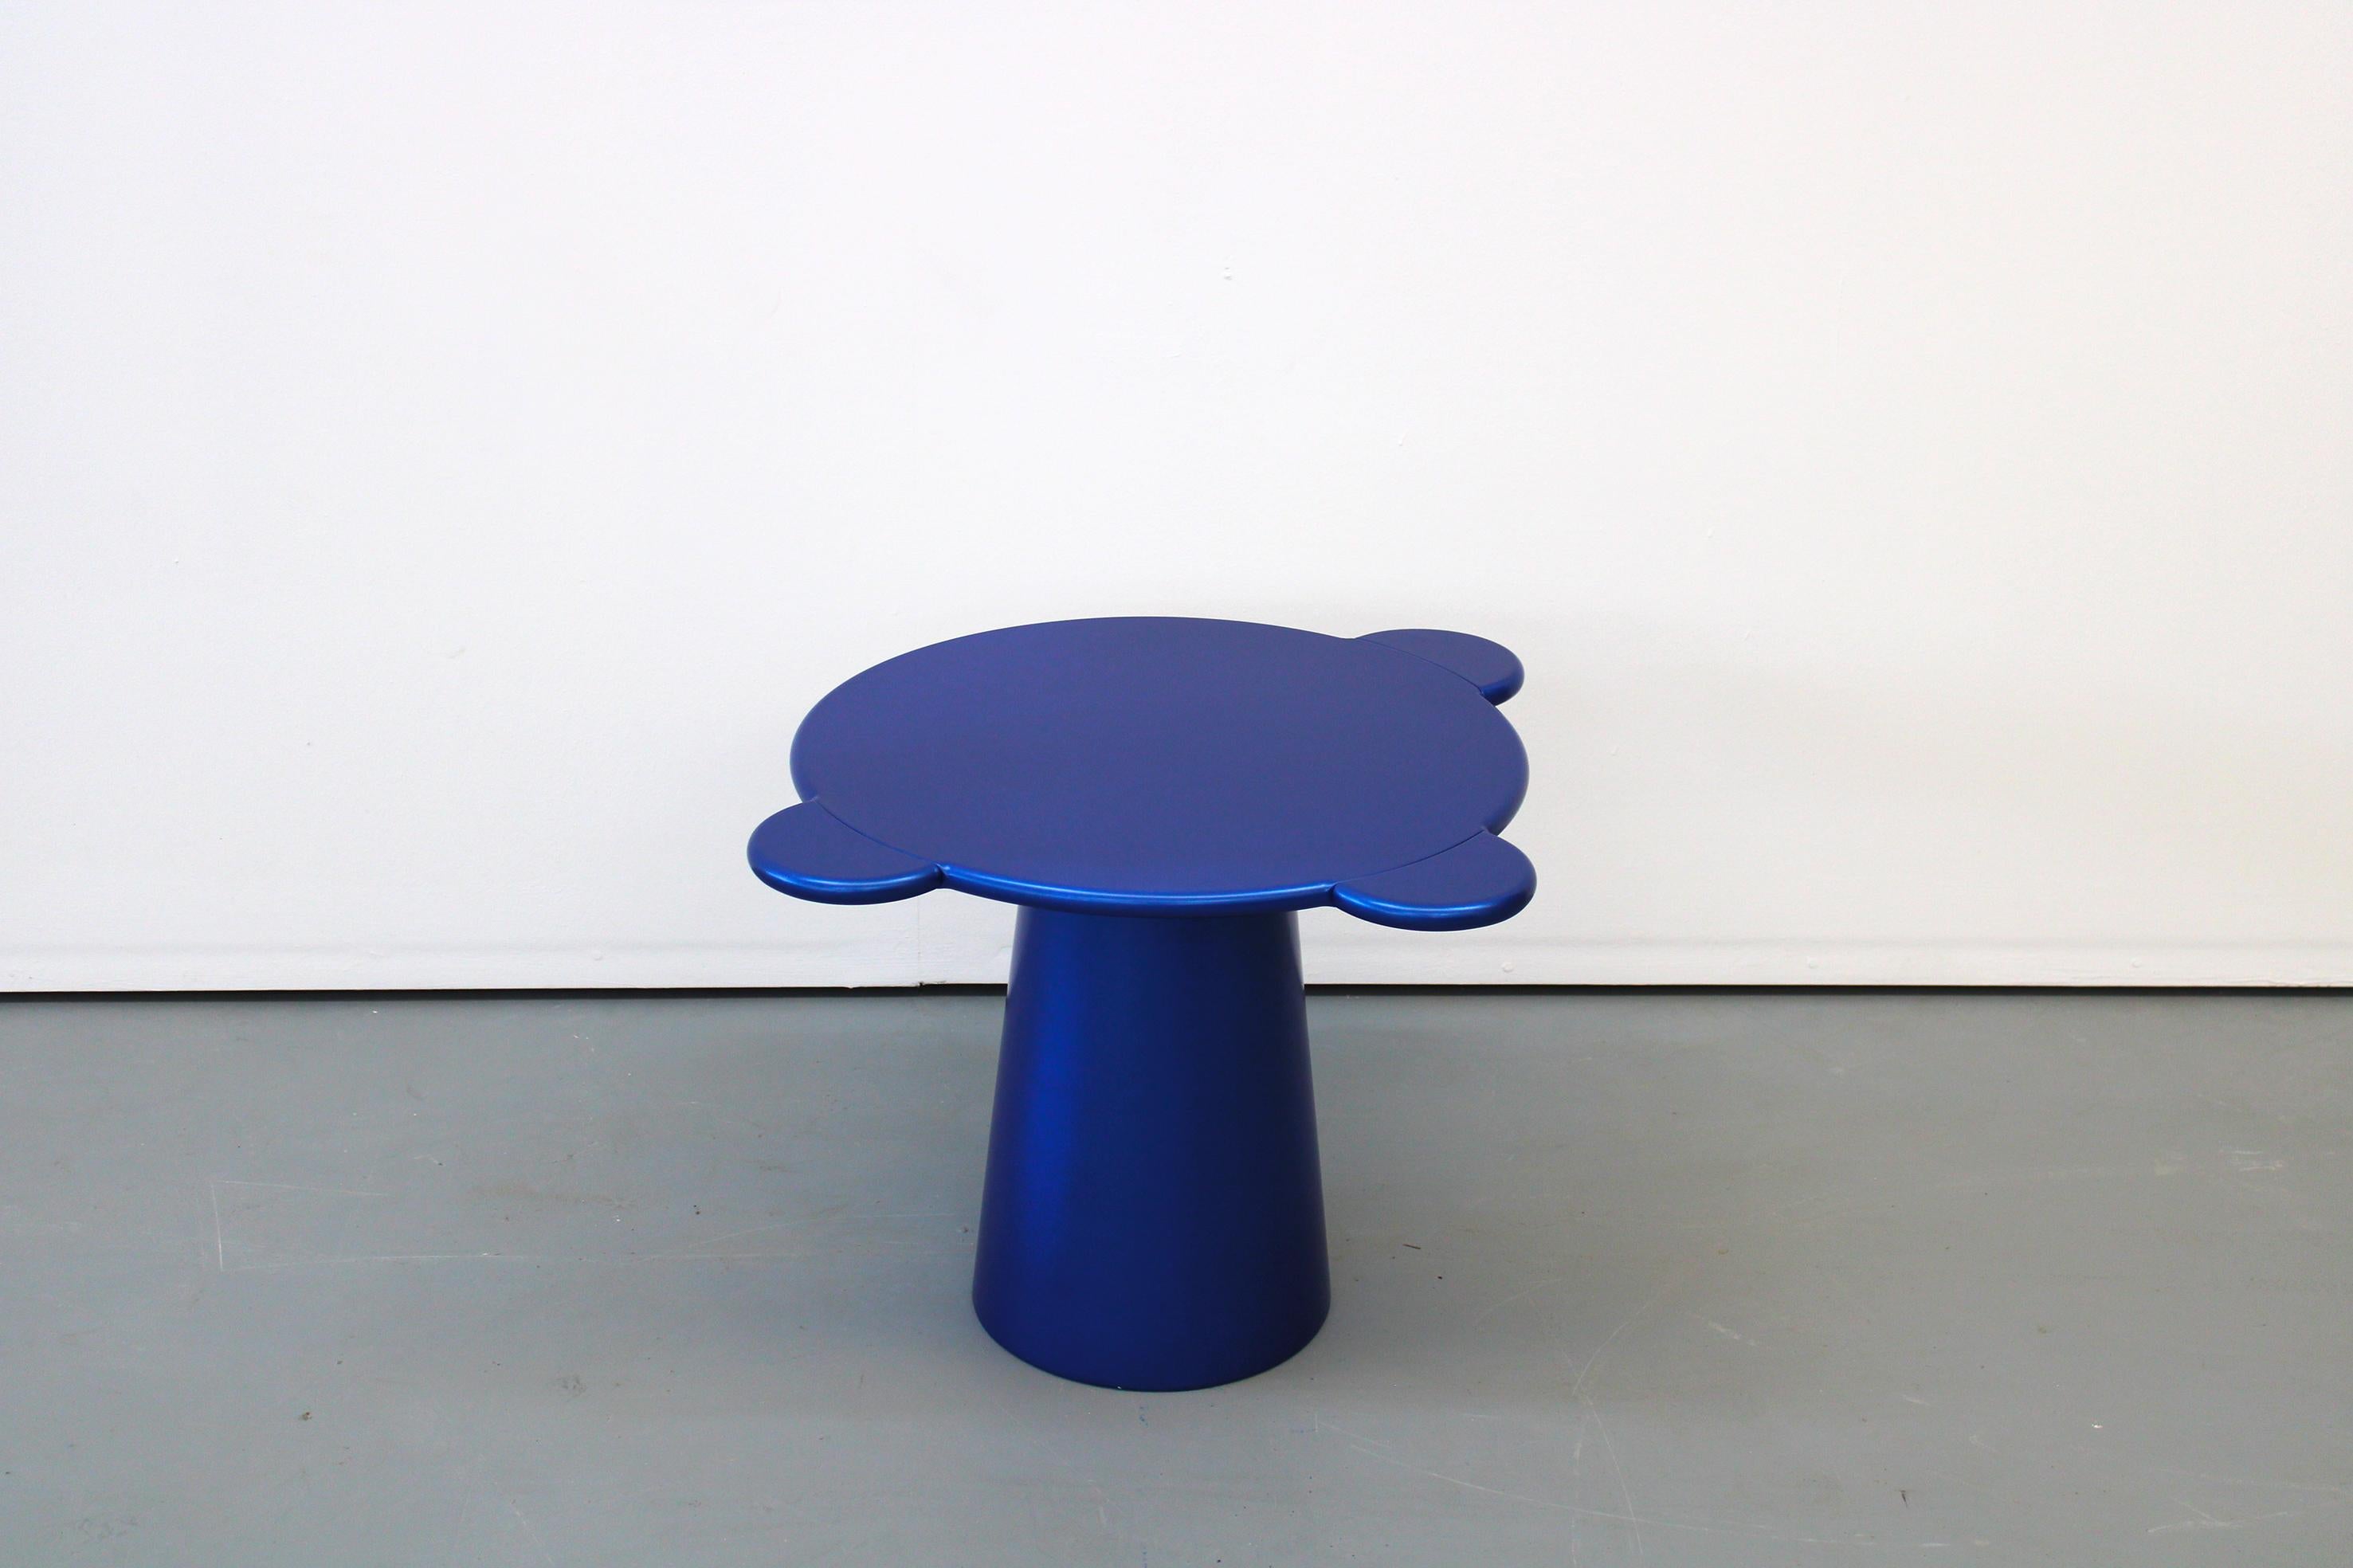 Donald is a multifunctional table with a sculpturally cosmic aspect and colorful circular shapes.
The sculptural silhouette has a wooden structure composed of a truncated cone that supports a round top adorned with three semi-circular flaps, ideal